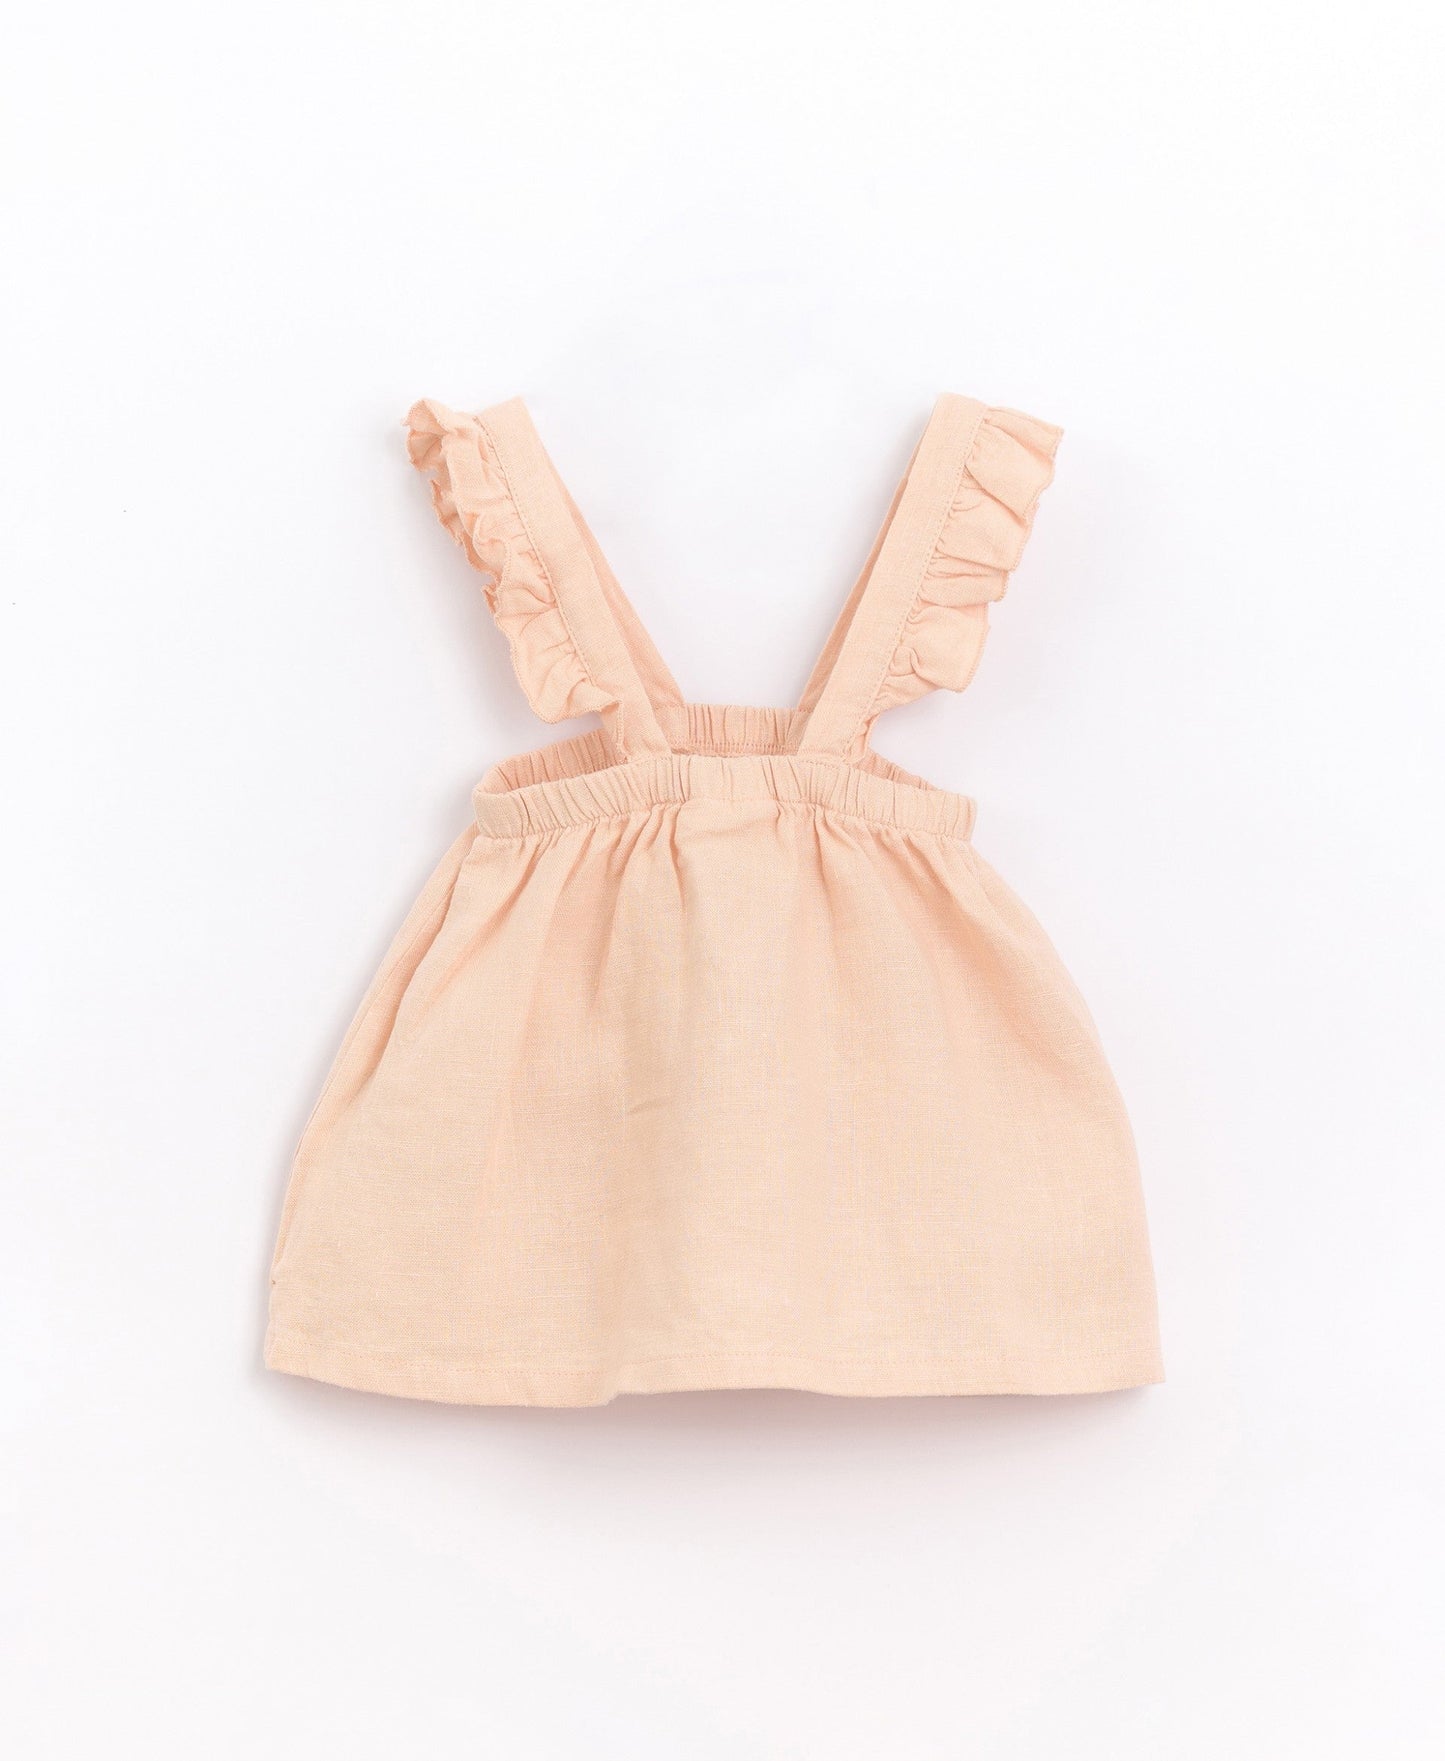 Play Up - Linen dress with straps | Basketry